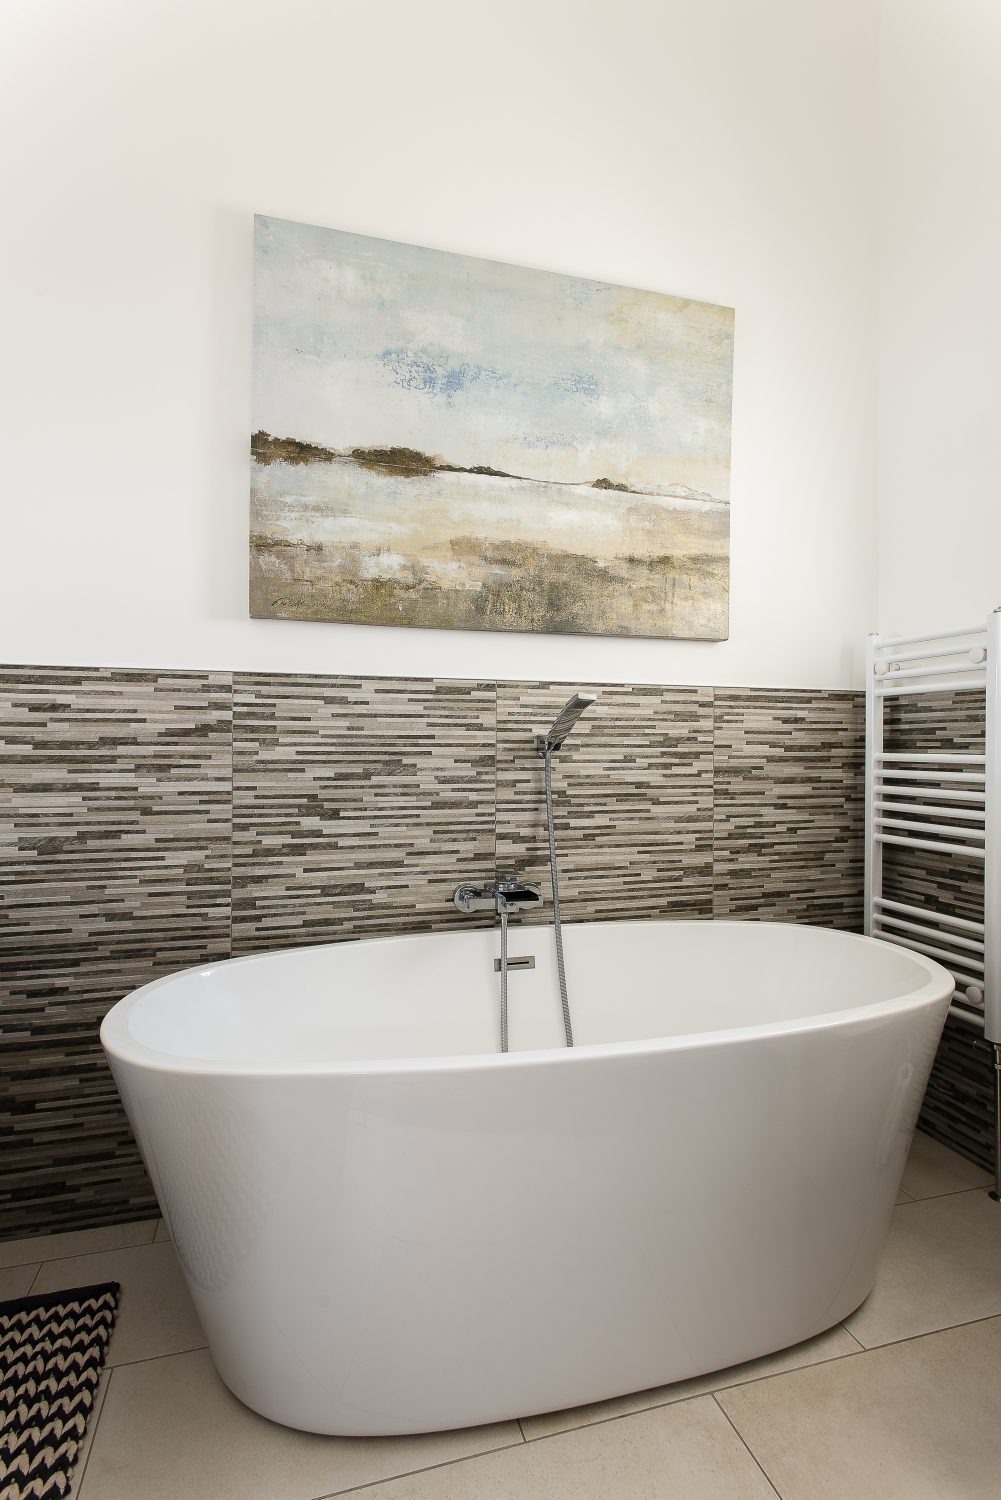 Two bathrooms, one accessible from two doors, have been stylishly fitted with a contemporary bath and shower. One of the bedrooms retains its original wooden tongue and groove cladding. “We started to sand it off,” says Kelly, “but liked the effect of leaving some of the green on the wood underneath.”